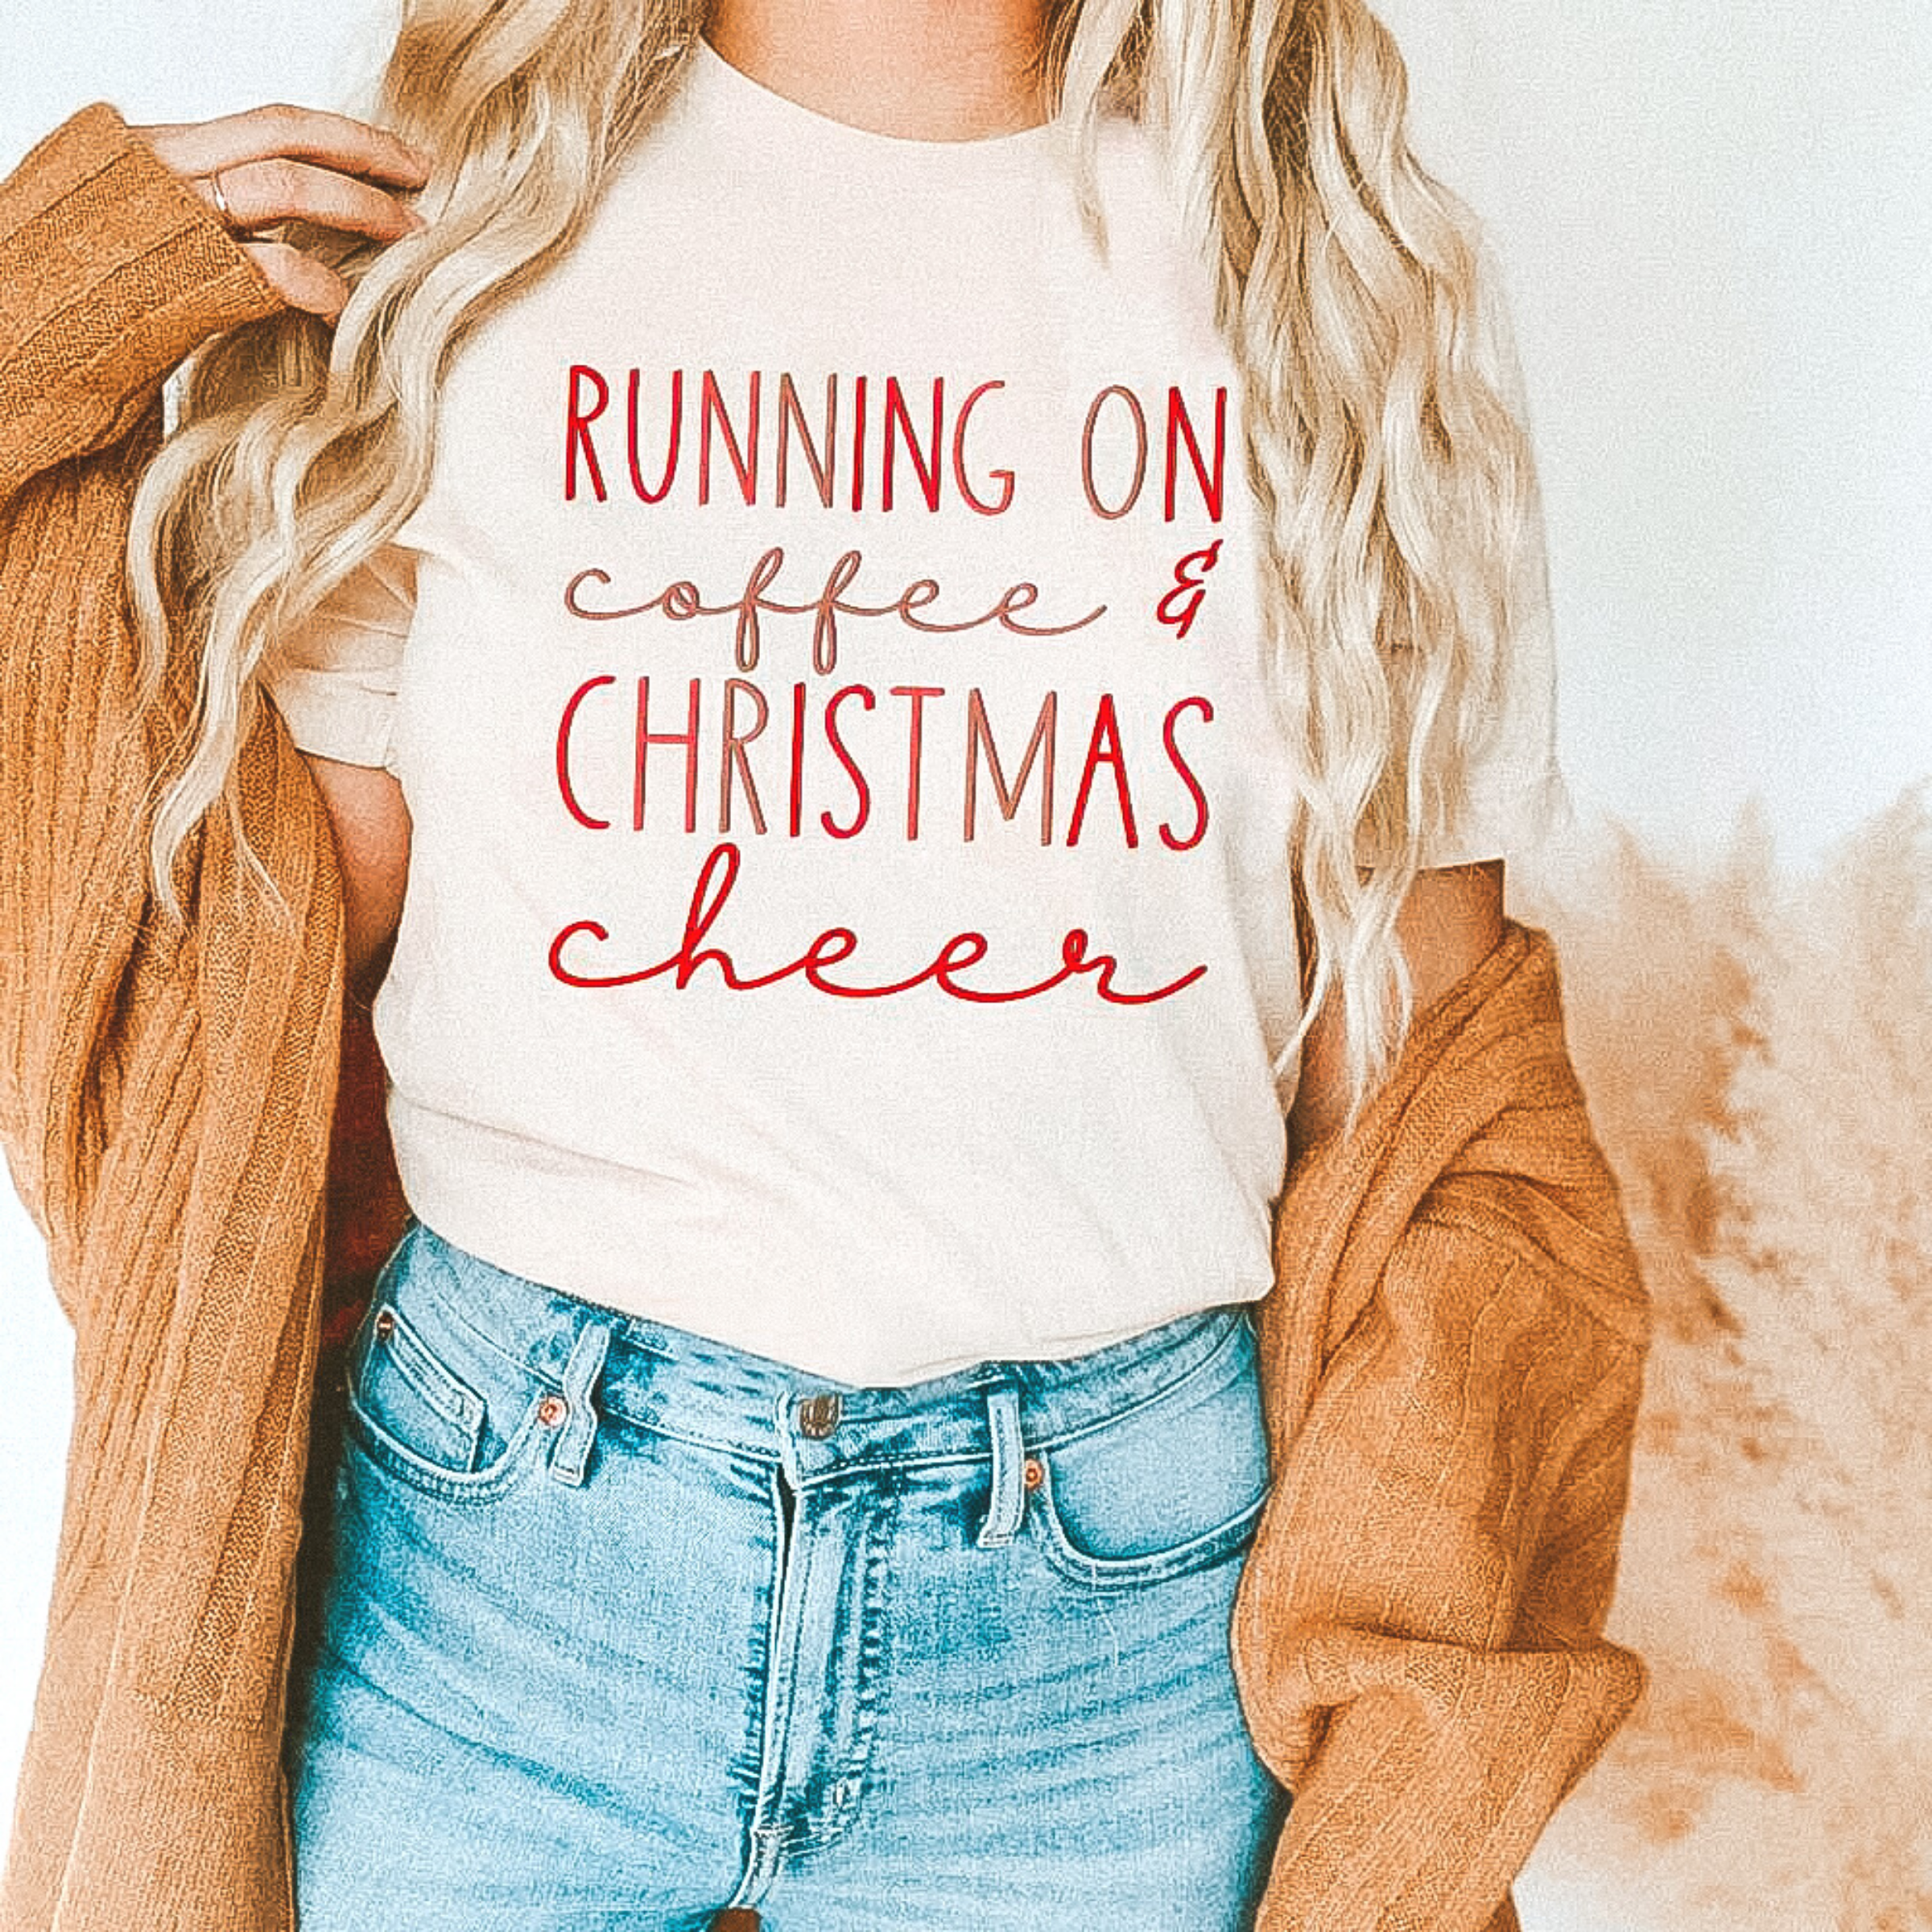 Model is wearing a short sleeve crew neck graphic tee that says "Running on Coffee & Christmas Cheer." Model has it paired with a camel brown cardigan and light wash blue jeans.